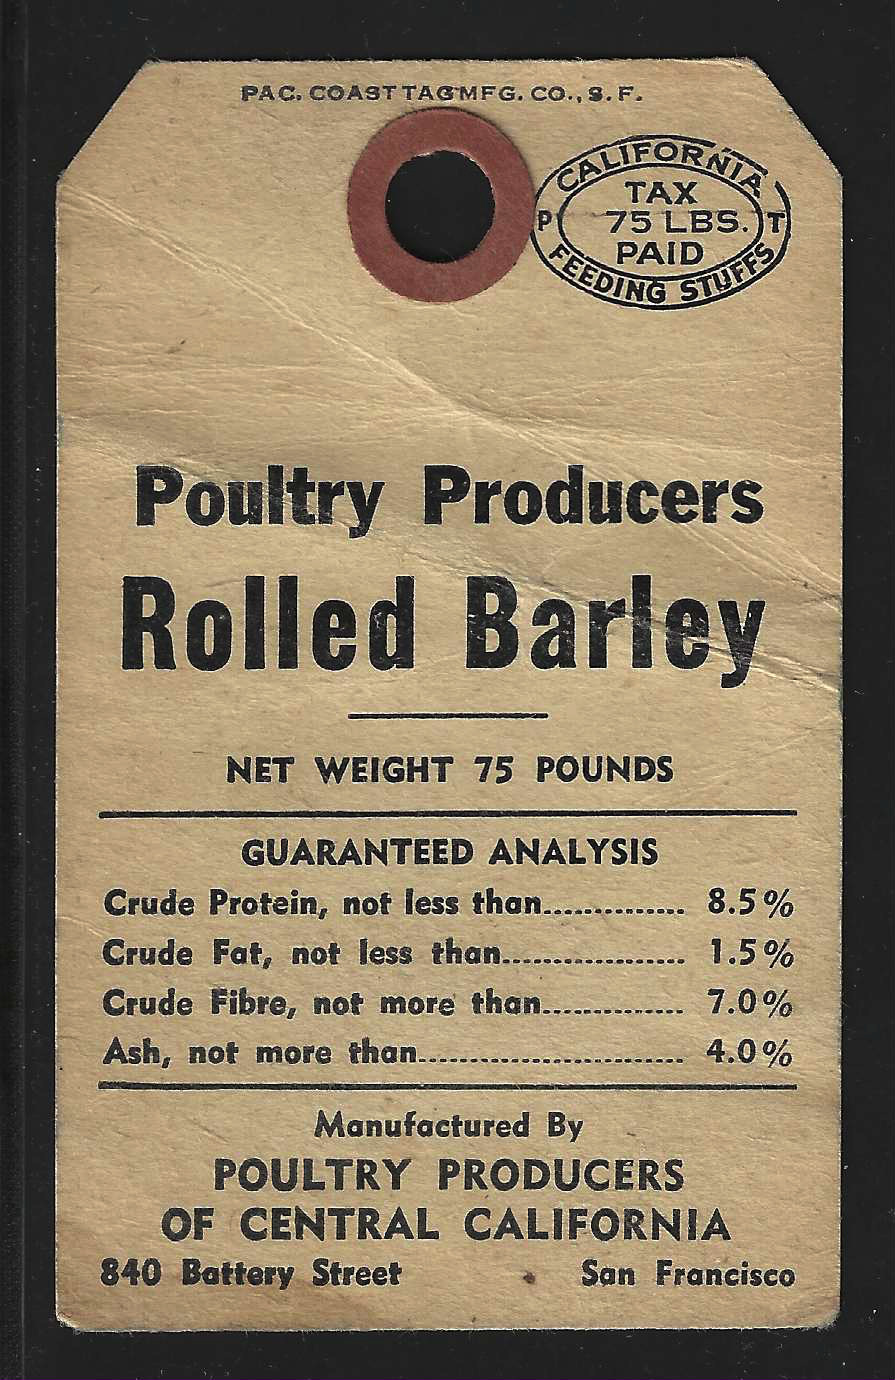 CA feed tag FET 83 75 lbs (PT) vertical format Rolled BarleyPoultry Producers of Central California, not recorded in the Joe Ross Catalog